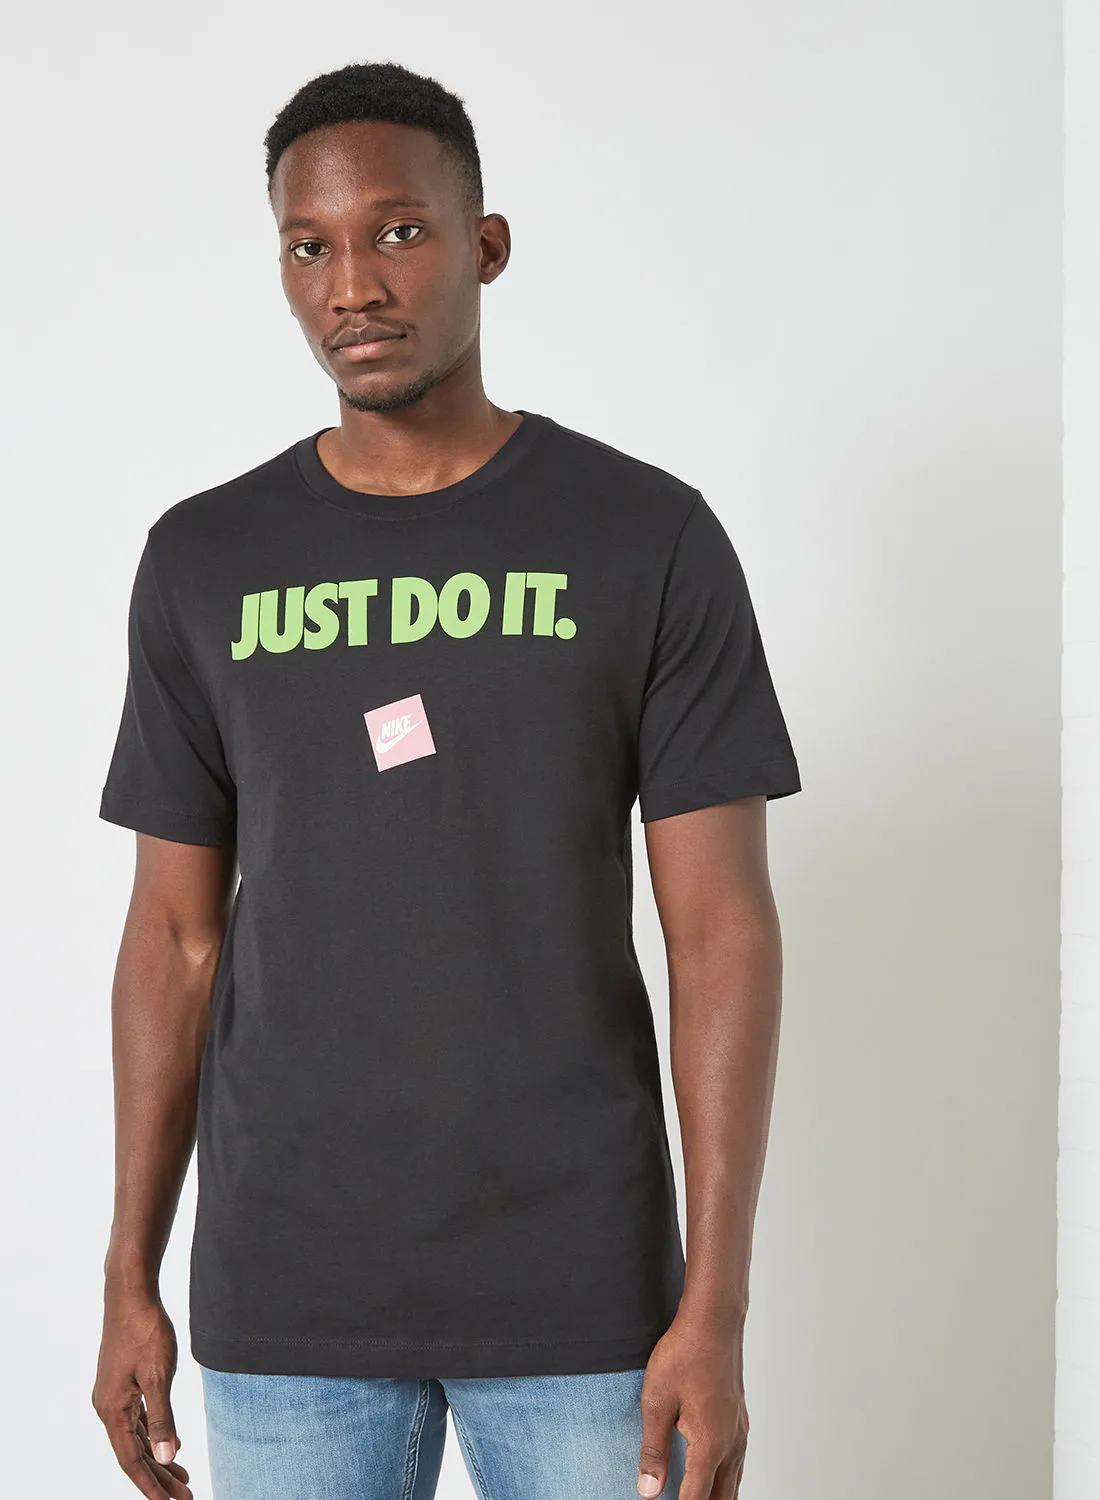 Nike NSW Just Do It 12 Month T-Shirt Black/Mean Green